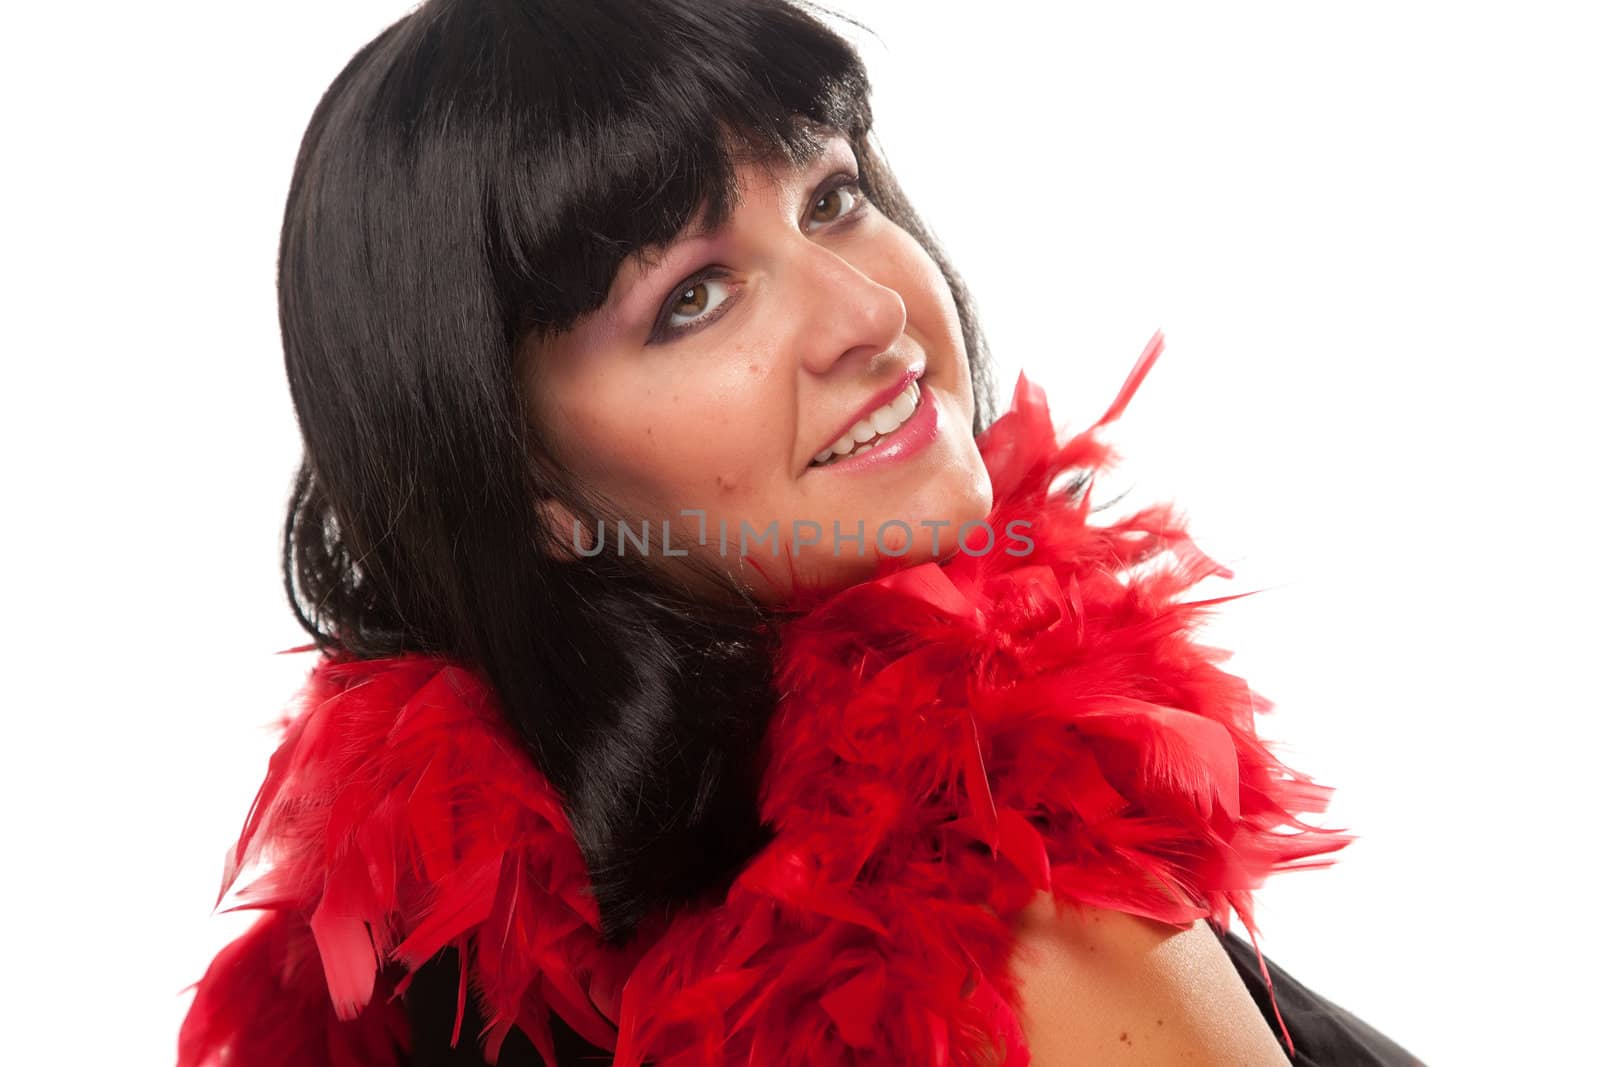 Pretty Girl with Red Feather Boa by Feverpitched